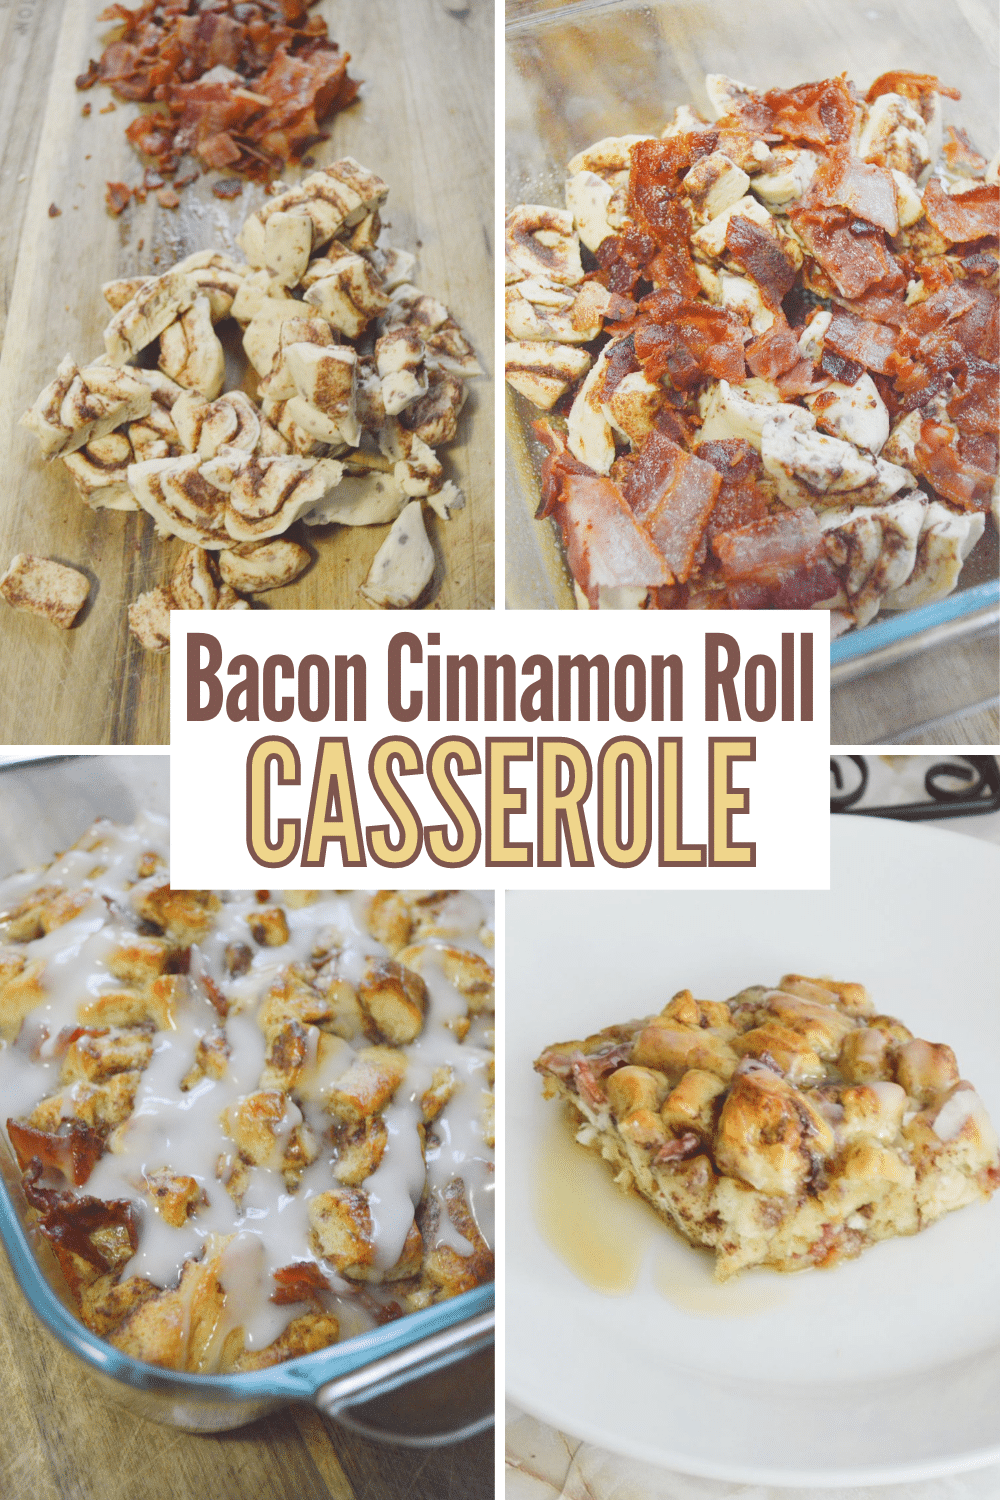 Bacon Cinnamon Roll Casserole is breakfast perfection. You get two of the best breakfast flavors in one dish! (just four ingredients!) #casserole #breakfast #bacon #cinnamonroll #recipe via @wondermomwannab